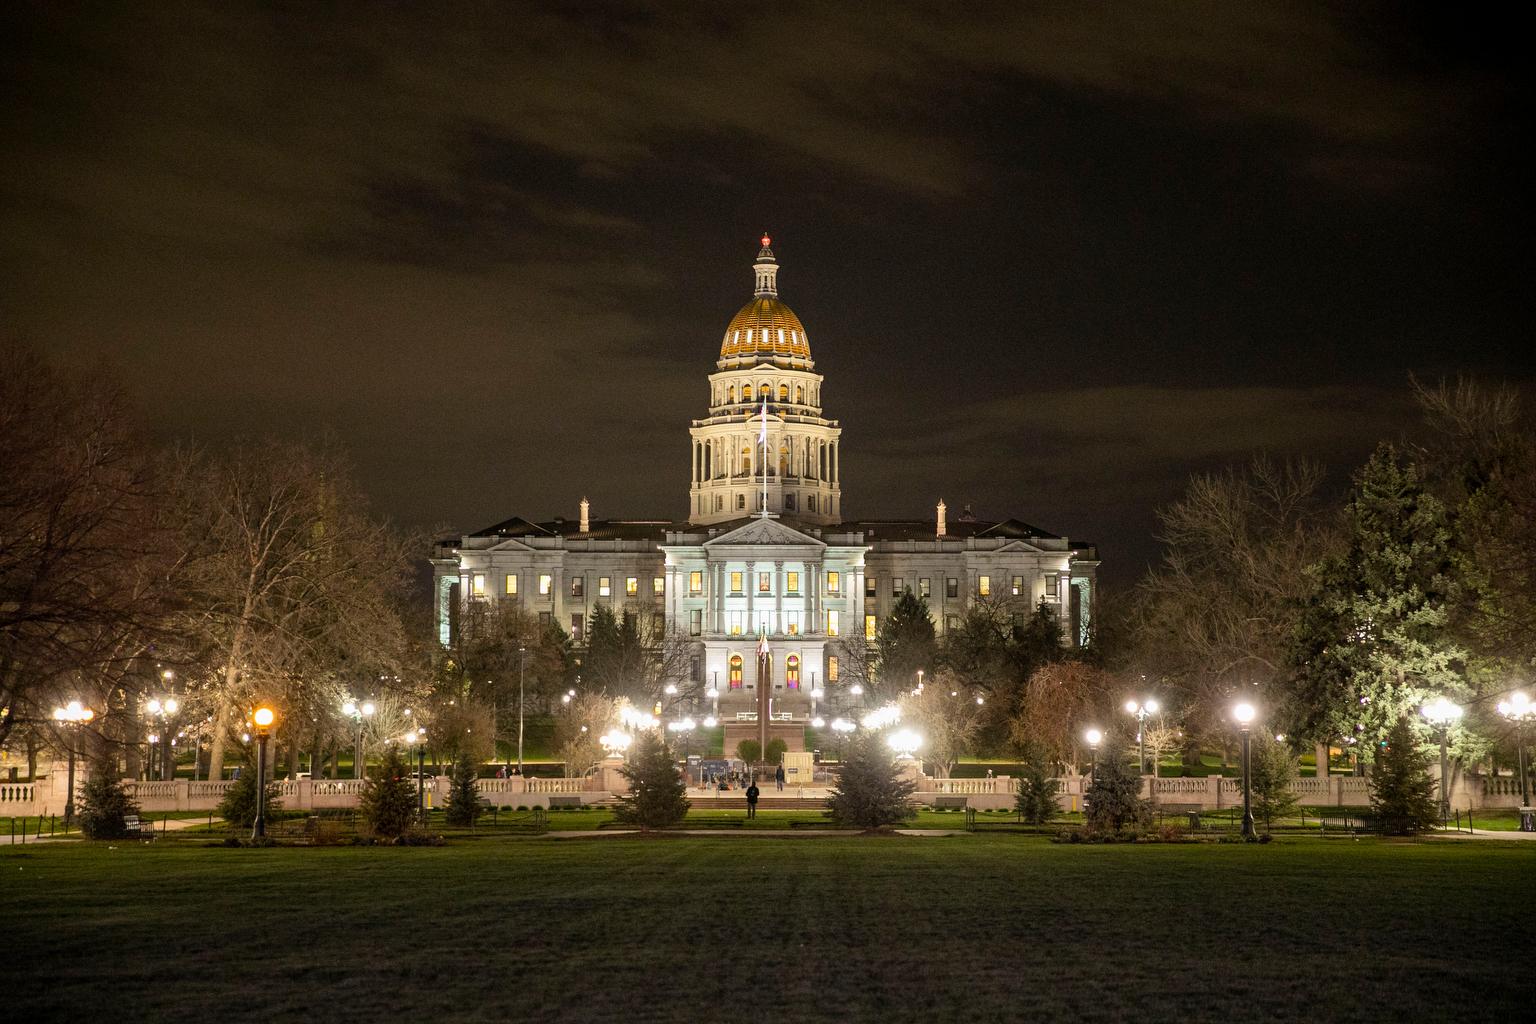 Colorado state Capitol building at night